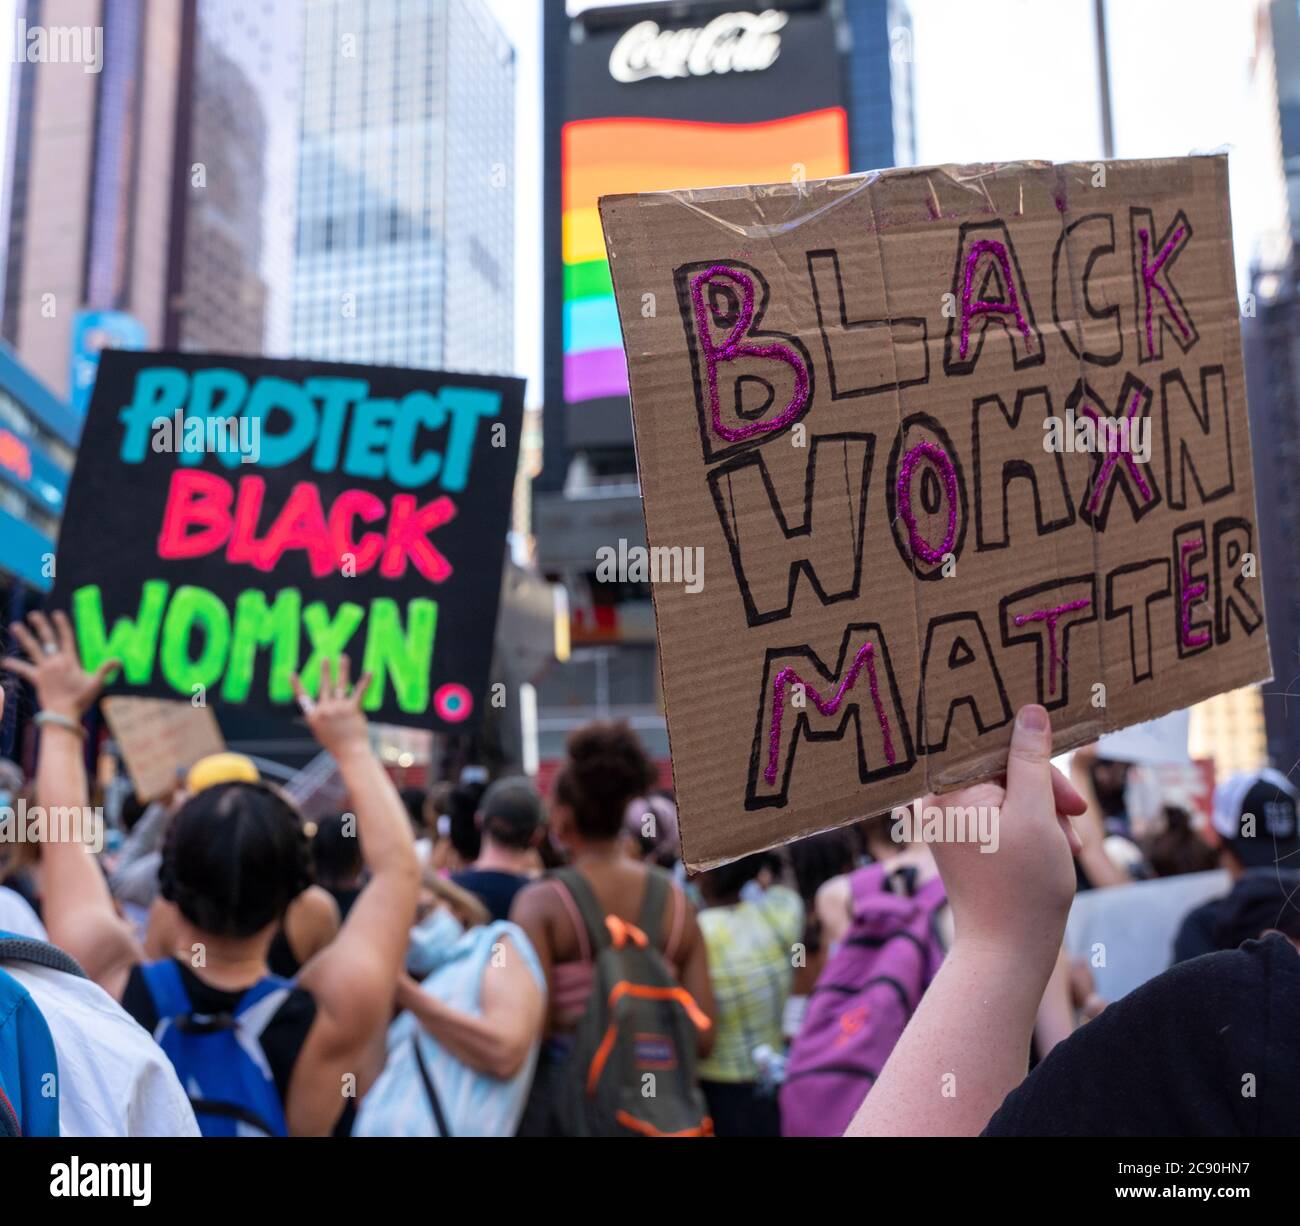 Black Womans/Womxn March Black Lives Matter Protest - Times Square, New York City - Black Womxn Matter Sign in protest crowd Stock Photo